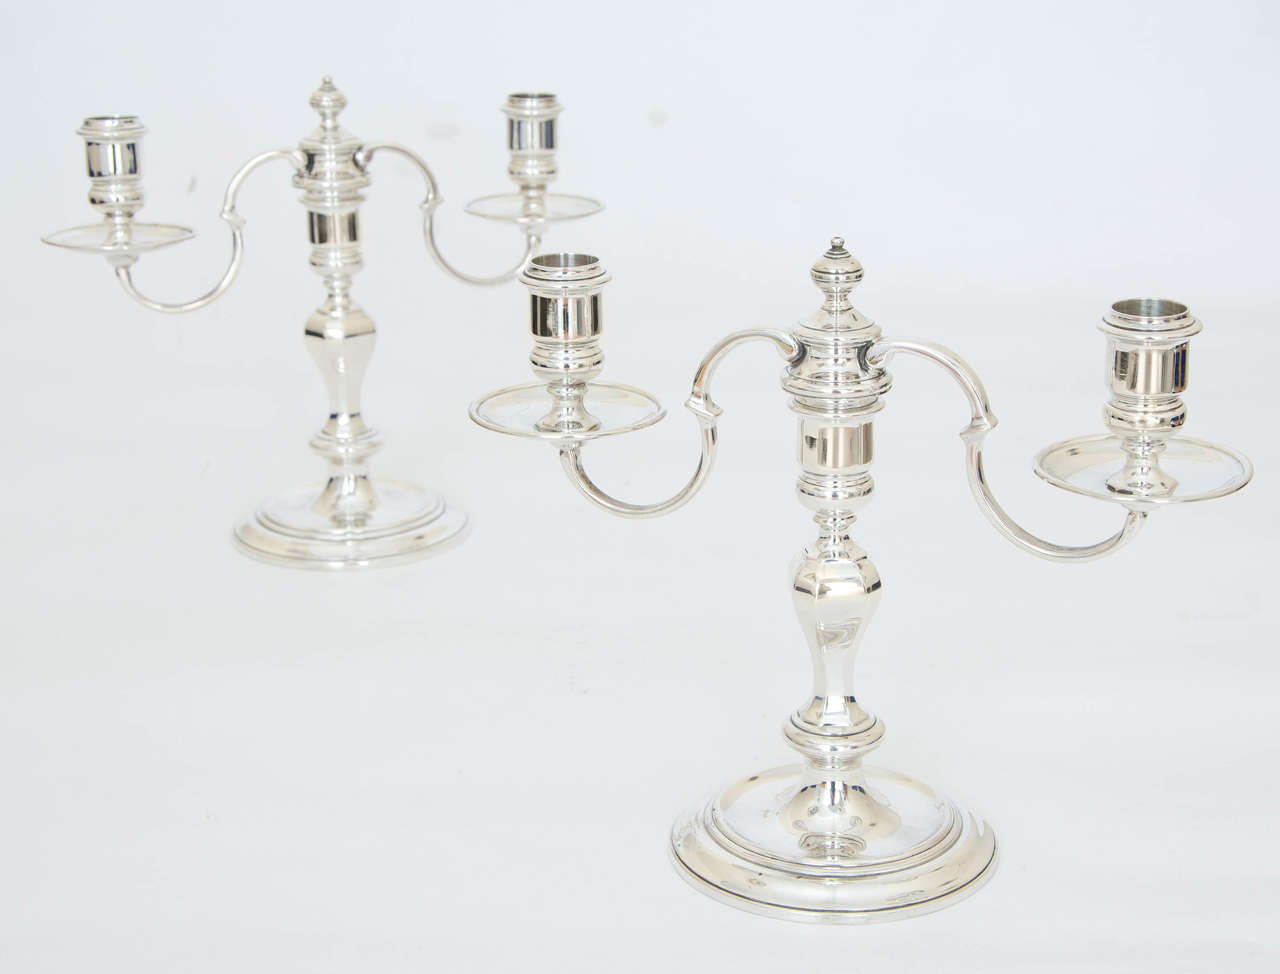 A pair of English sterling silver candelabra made in London, 1953 and along with the usual hallmarks there is also the Coronation hallmark of Queen Elizabeth II.
The two-light branches can be removed so that they can be used as a pair of